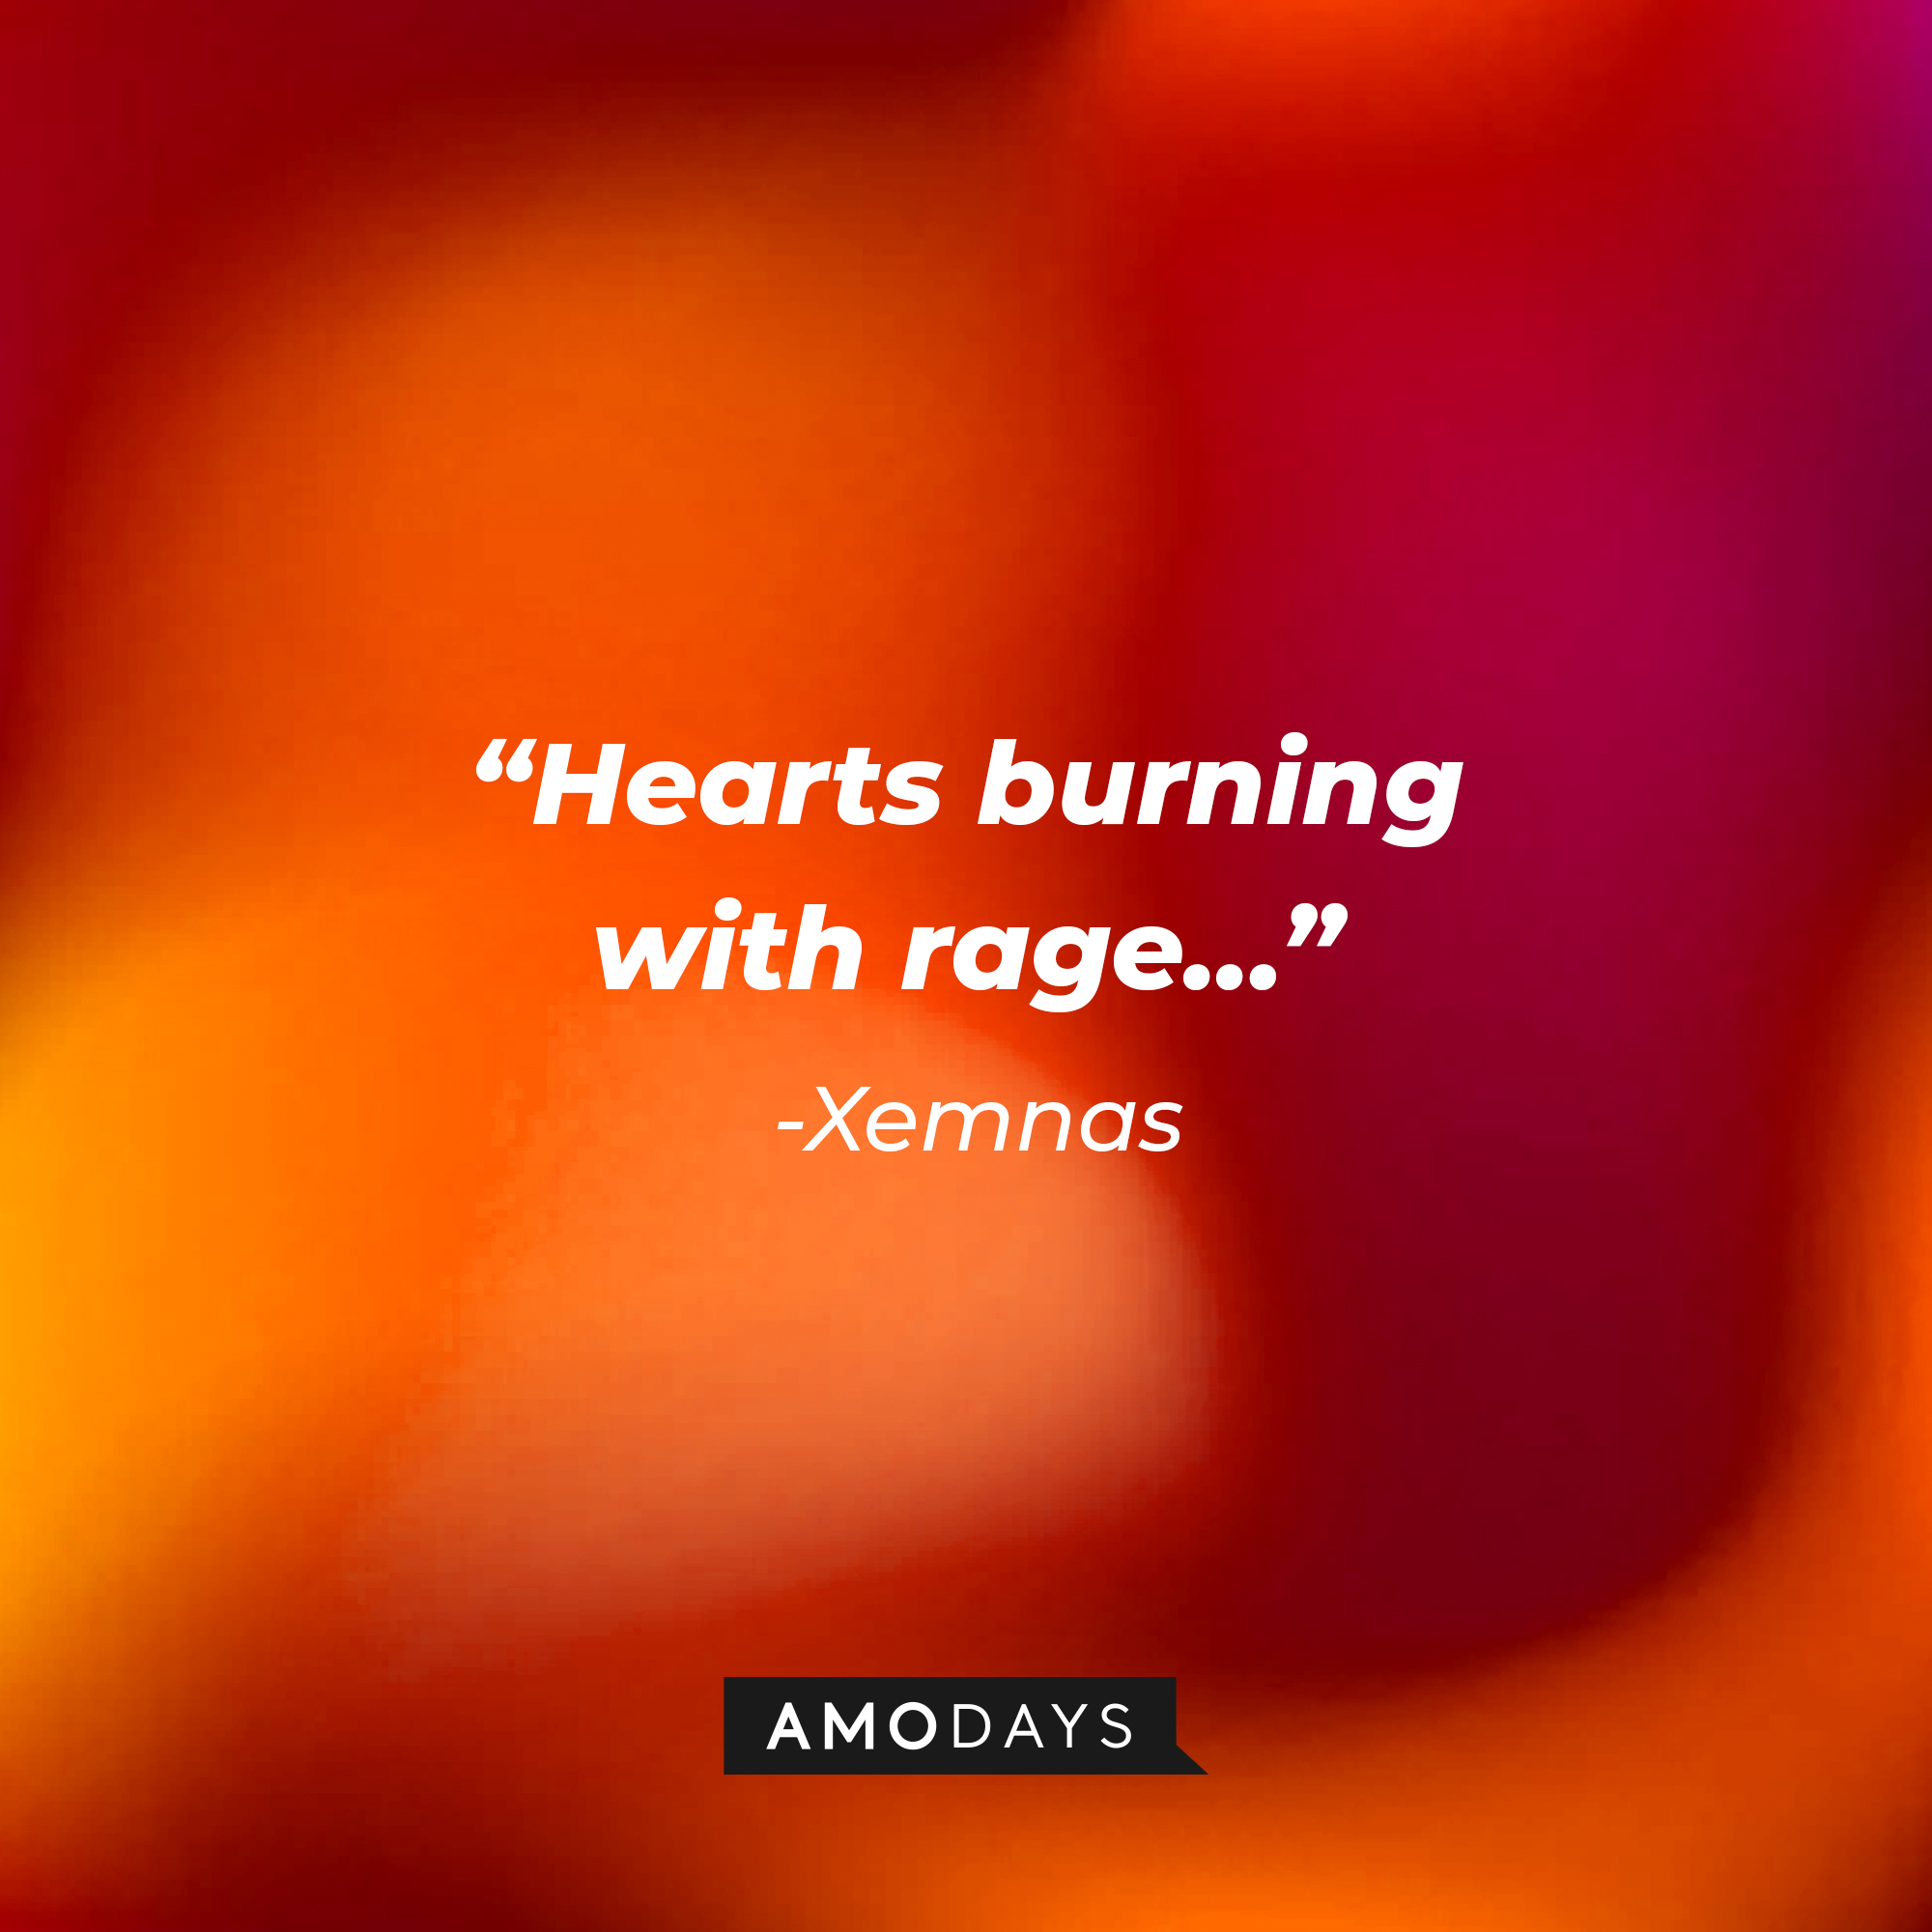 Xenmas’ quote: “Hearts burning with rage…” | Source: AmoDays